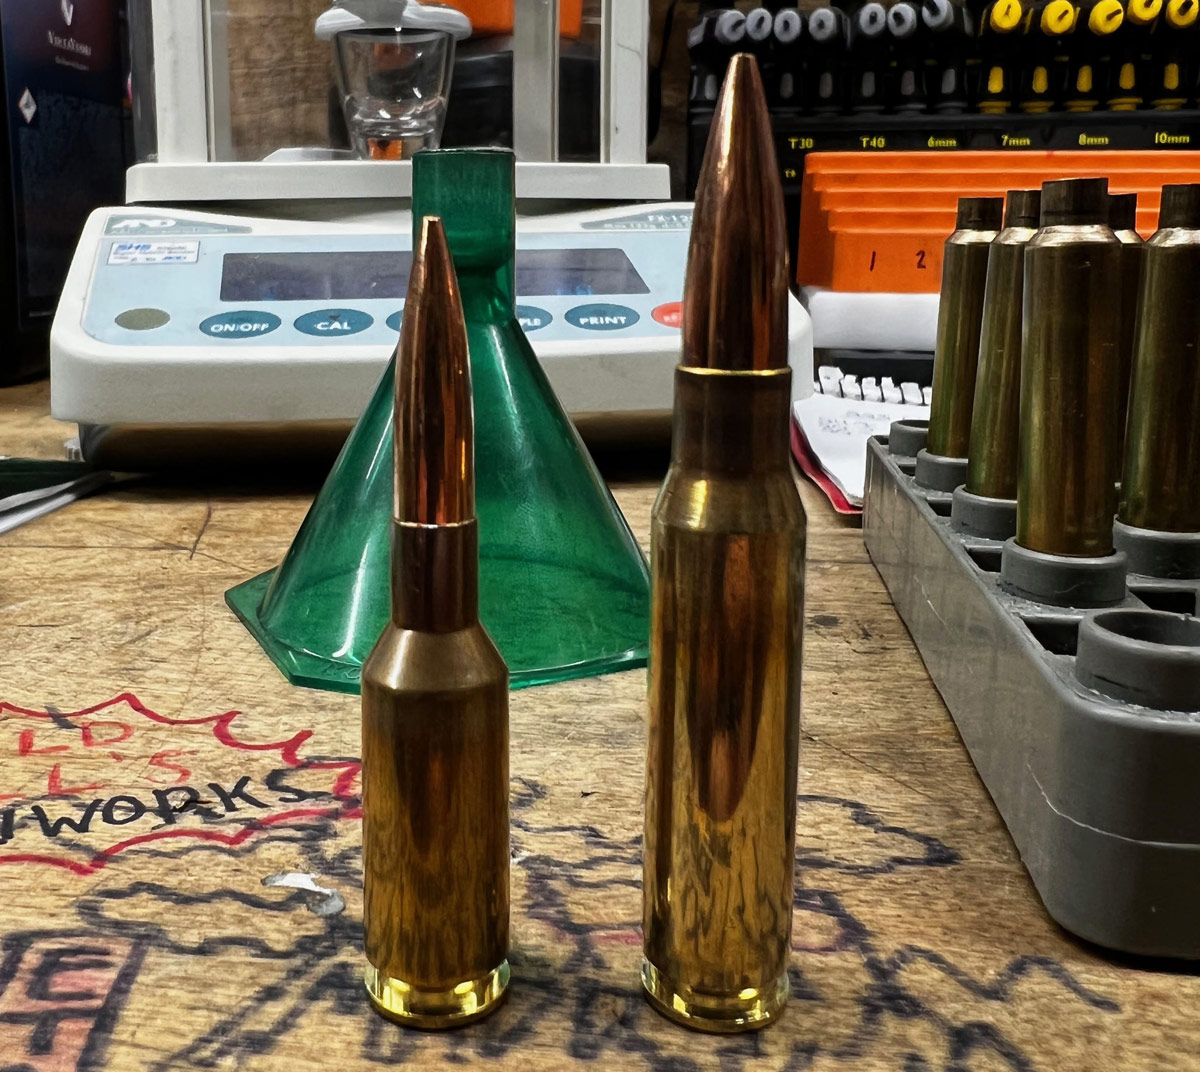 6BR Norma and 308 Winchester. The 6mm BR Norma is efficient and versatile, great for competition but also hunting varmints and small game.